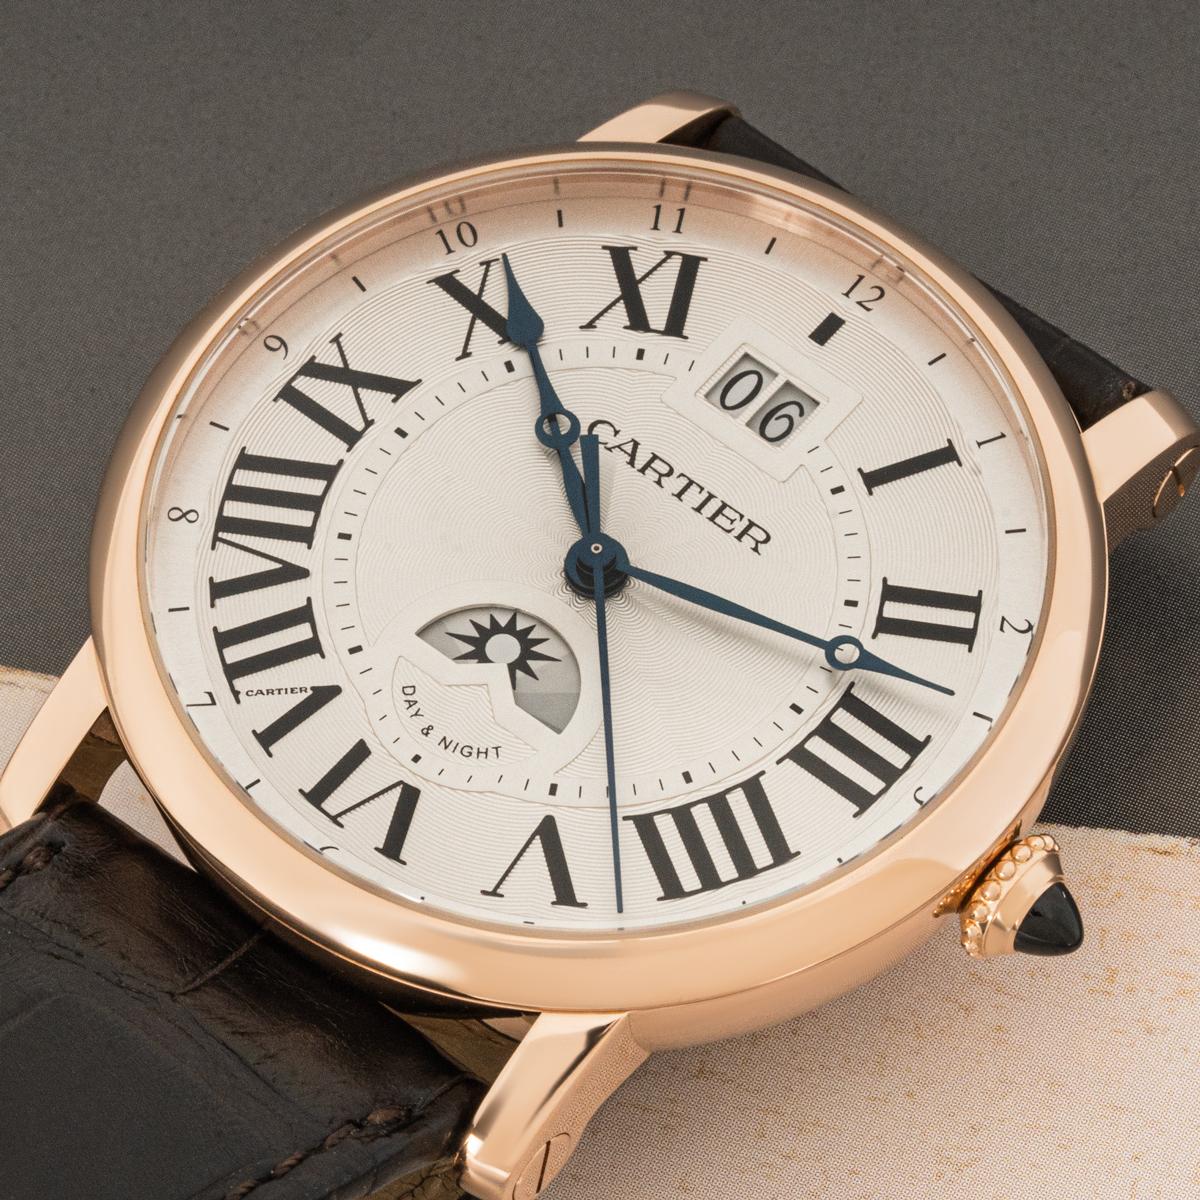 A 42mm Rotonde De Cartier wristwatch crafted in rose gold. Featuring a silver guilloche dial with roman numerals, a large date display, a second-time zone function and day/night indicators. Fitted with a sapphire glass, a self-winding automatic